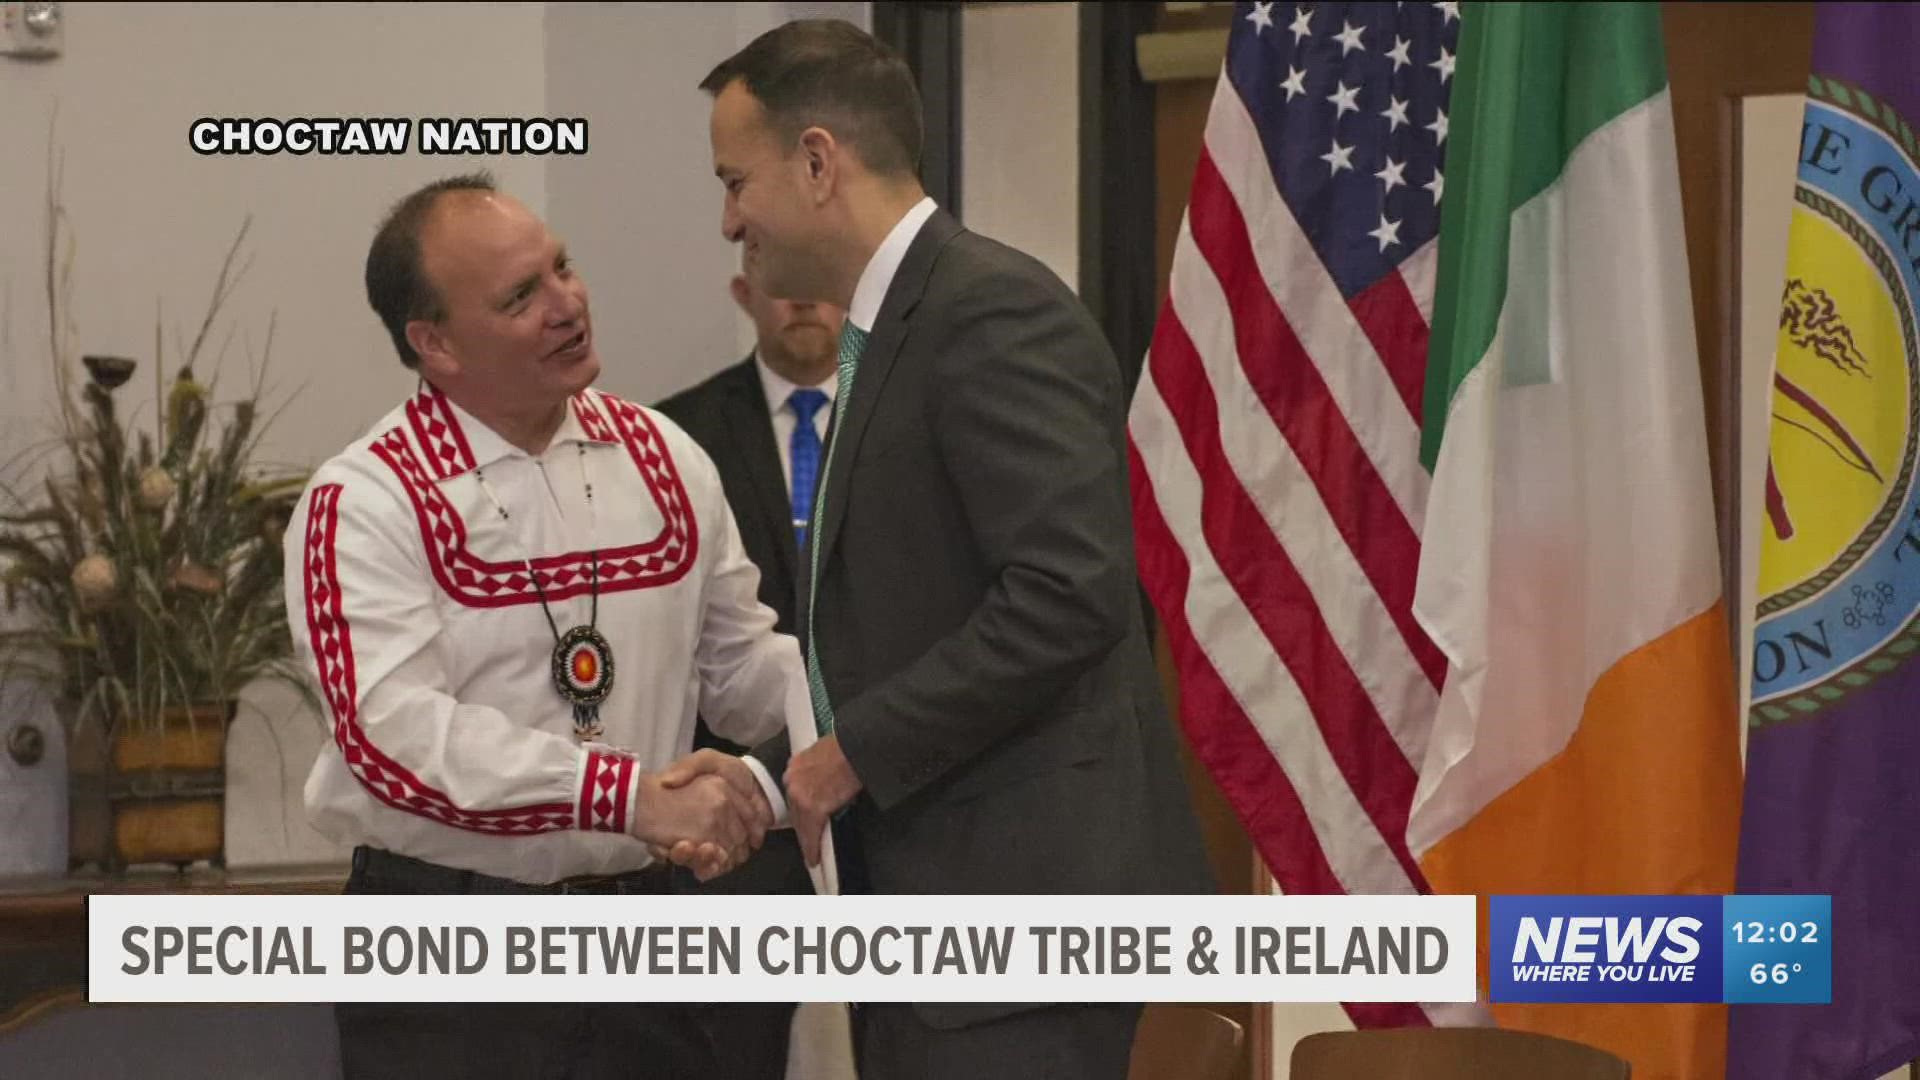 Nearly 200 years later, the unique bond between the Choctaw Nation and Ireland continues to thrive.